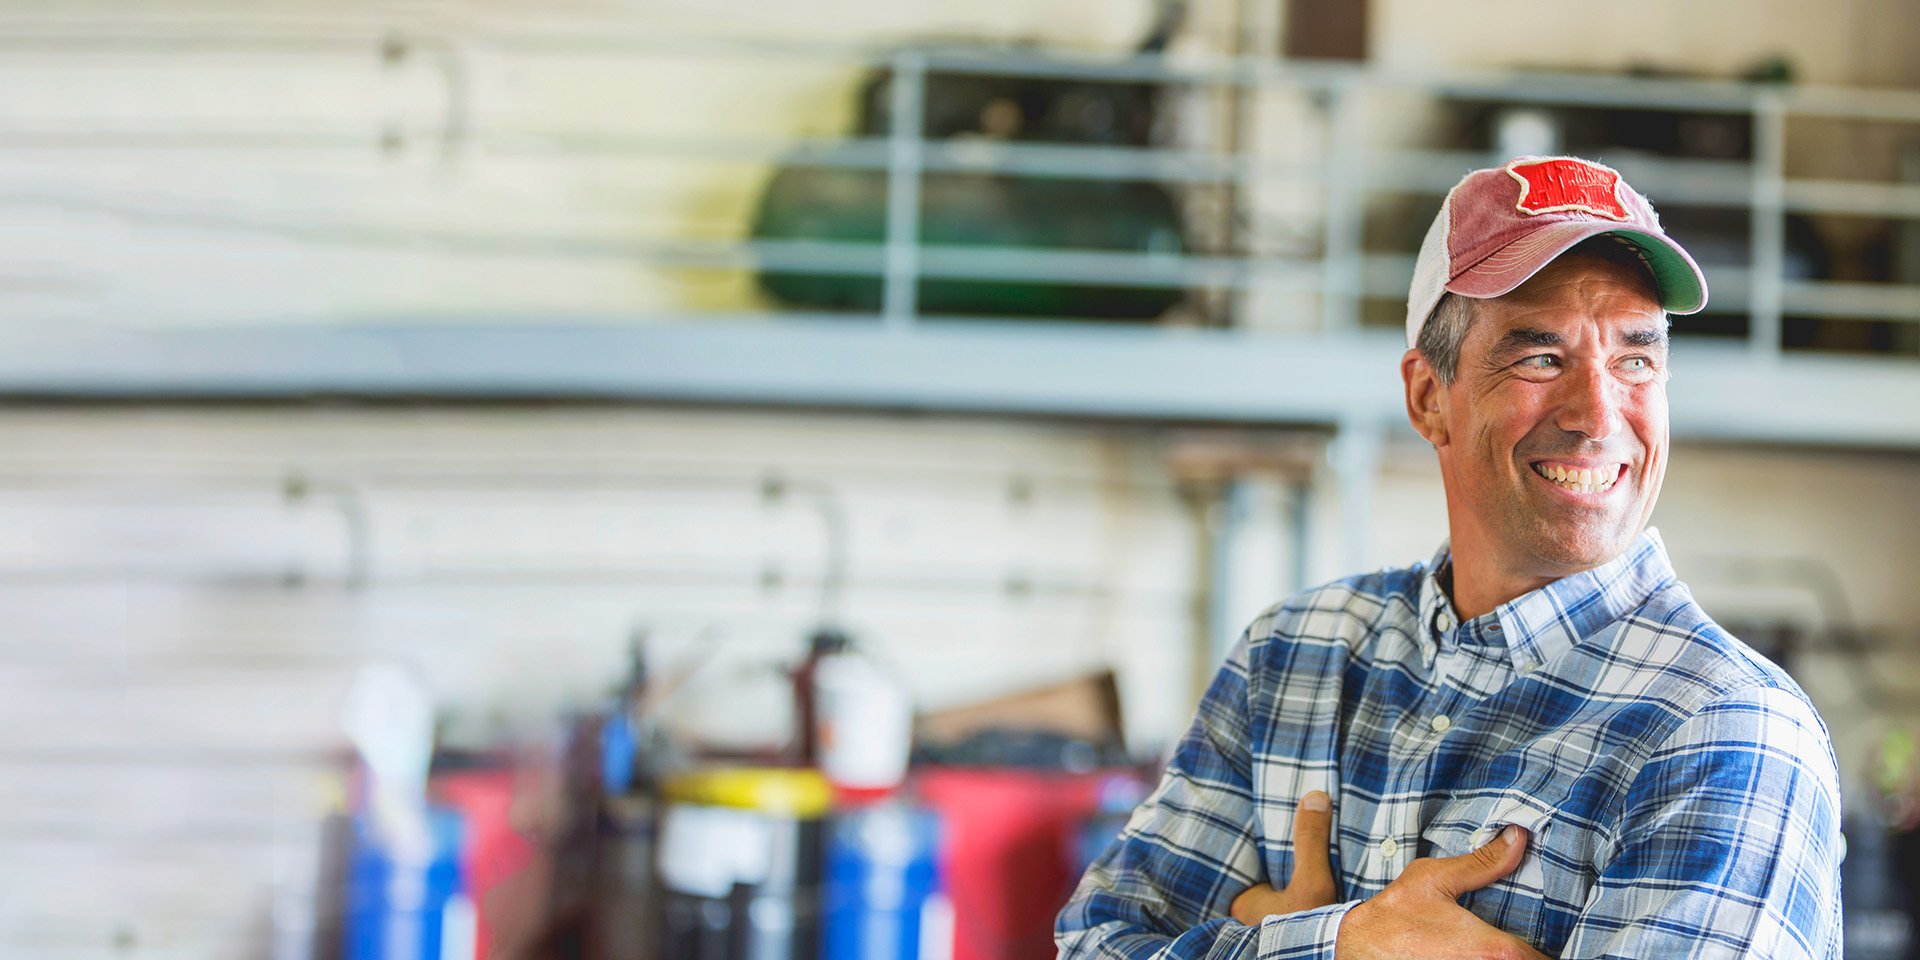 A middle-aged rancher in a ballcap stands confidently in his stable, arms crossed, and smiles off to the side, embodying pride and contentment in his work.